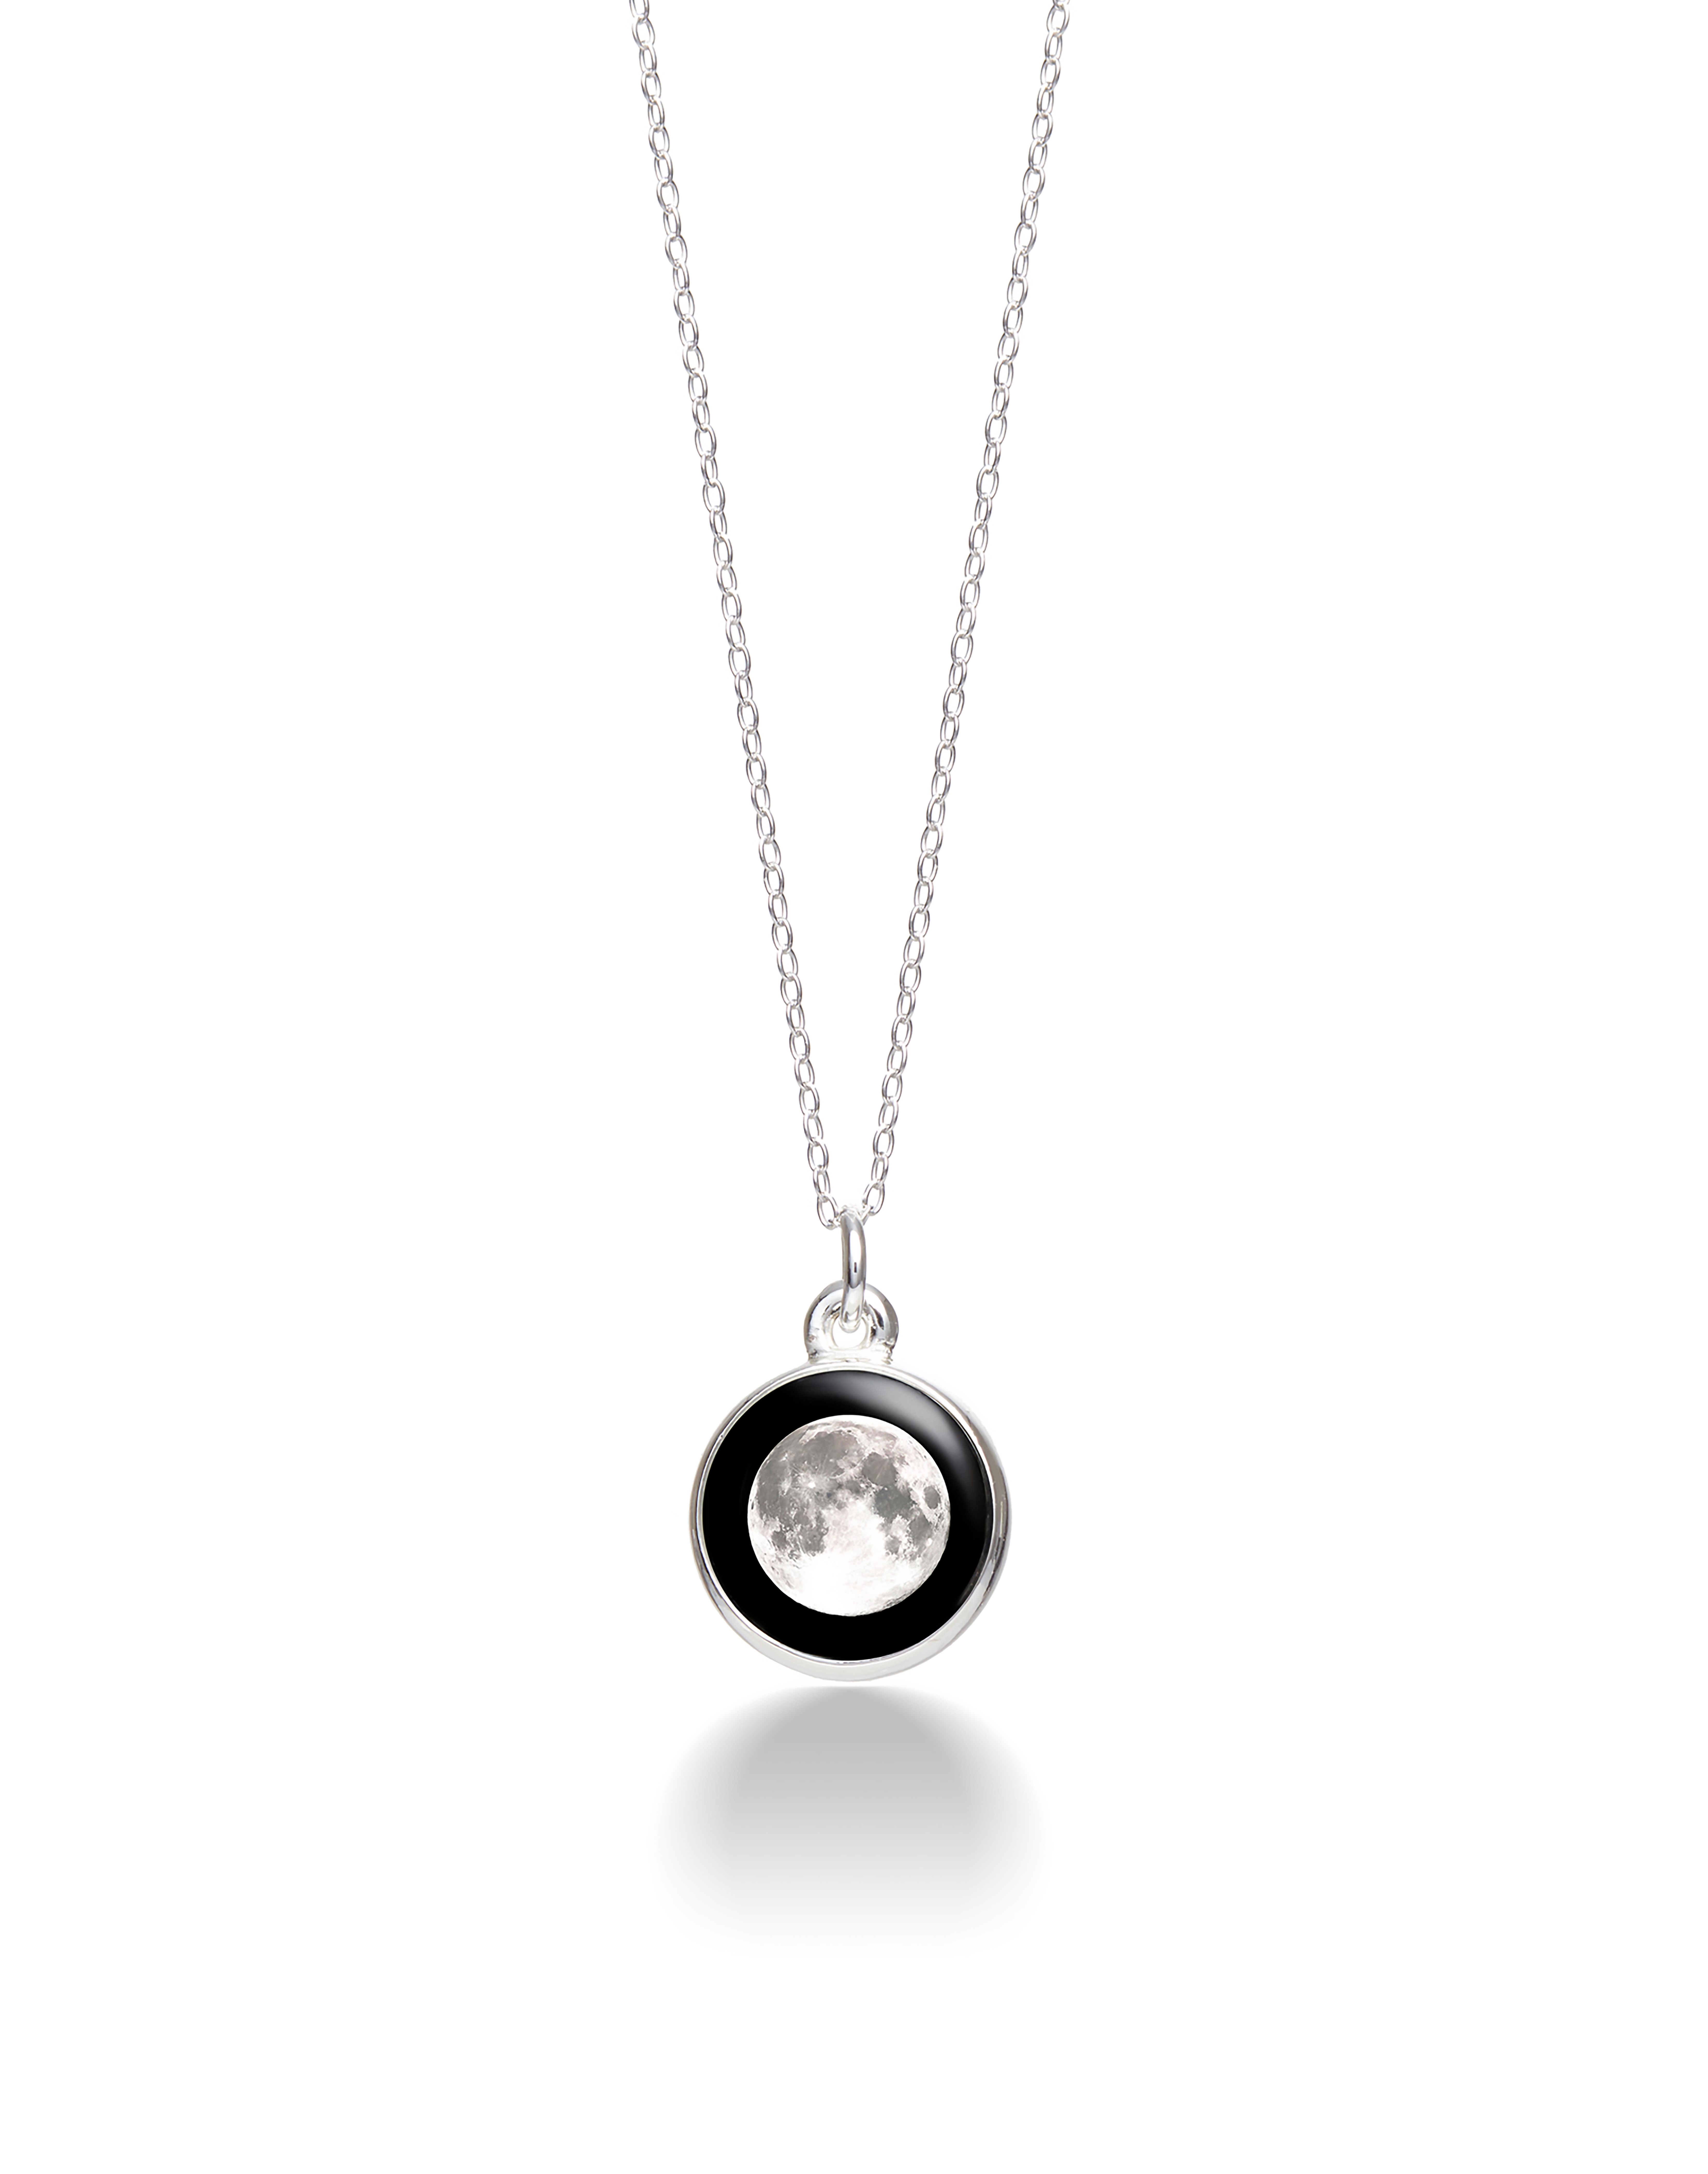 Moonlight Meteor Necklace in Silver 
															/ Moonglow Jewelry							